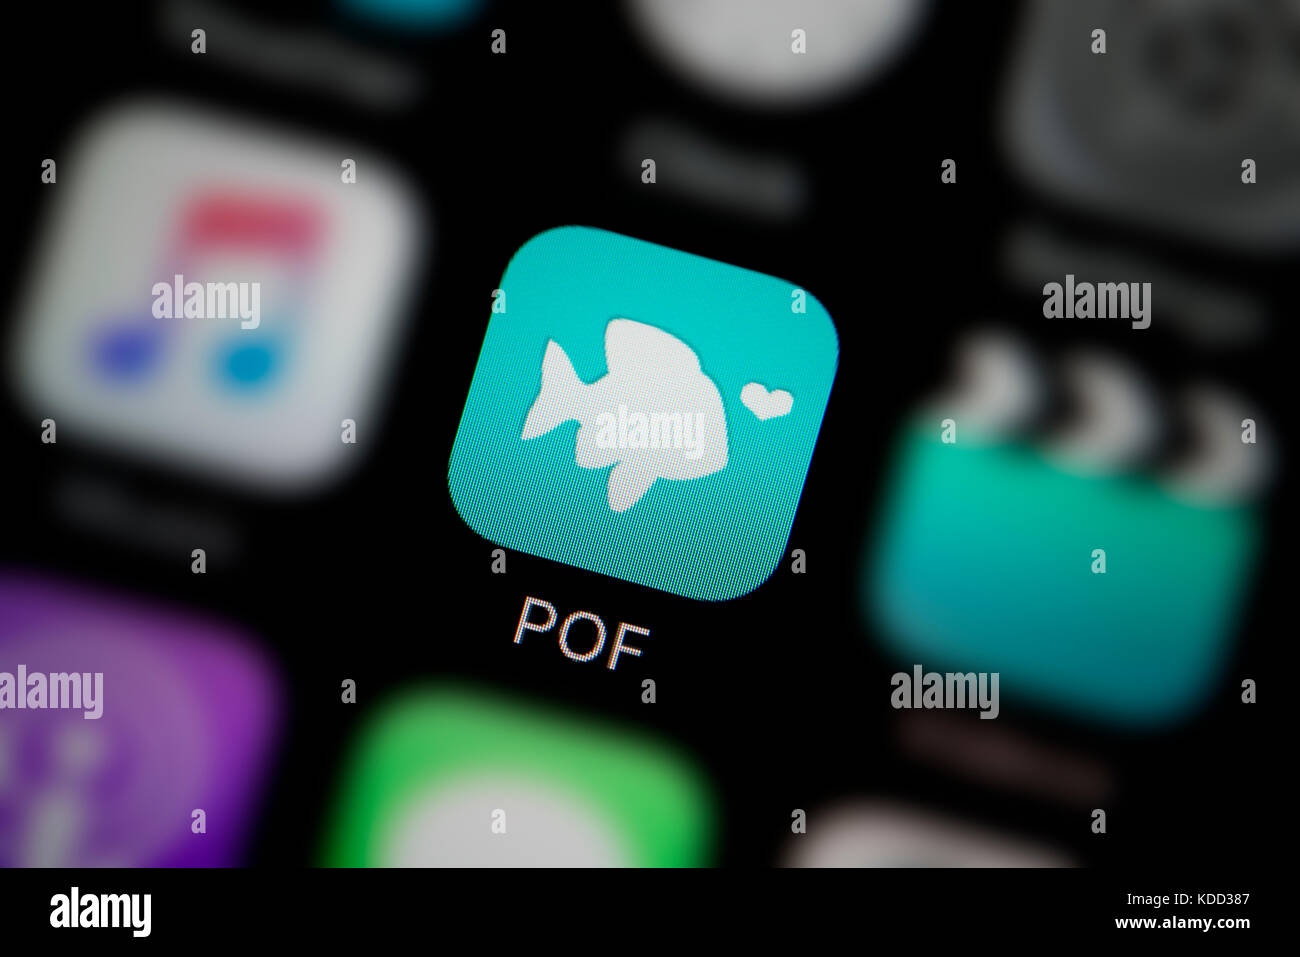 A close-up shot of the logo representing POF Plenty of Fish app icon, as seen on the screen of a smart phone (Editorial use only) Stock Photo